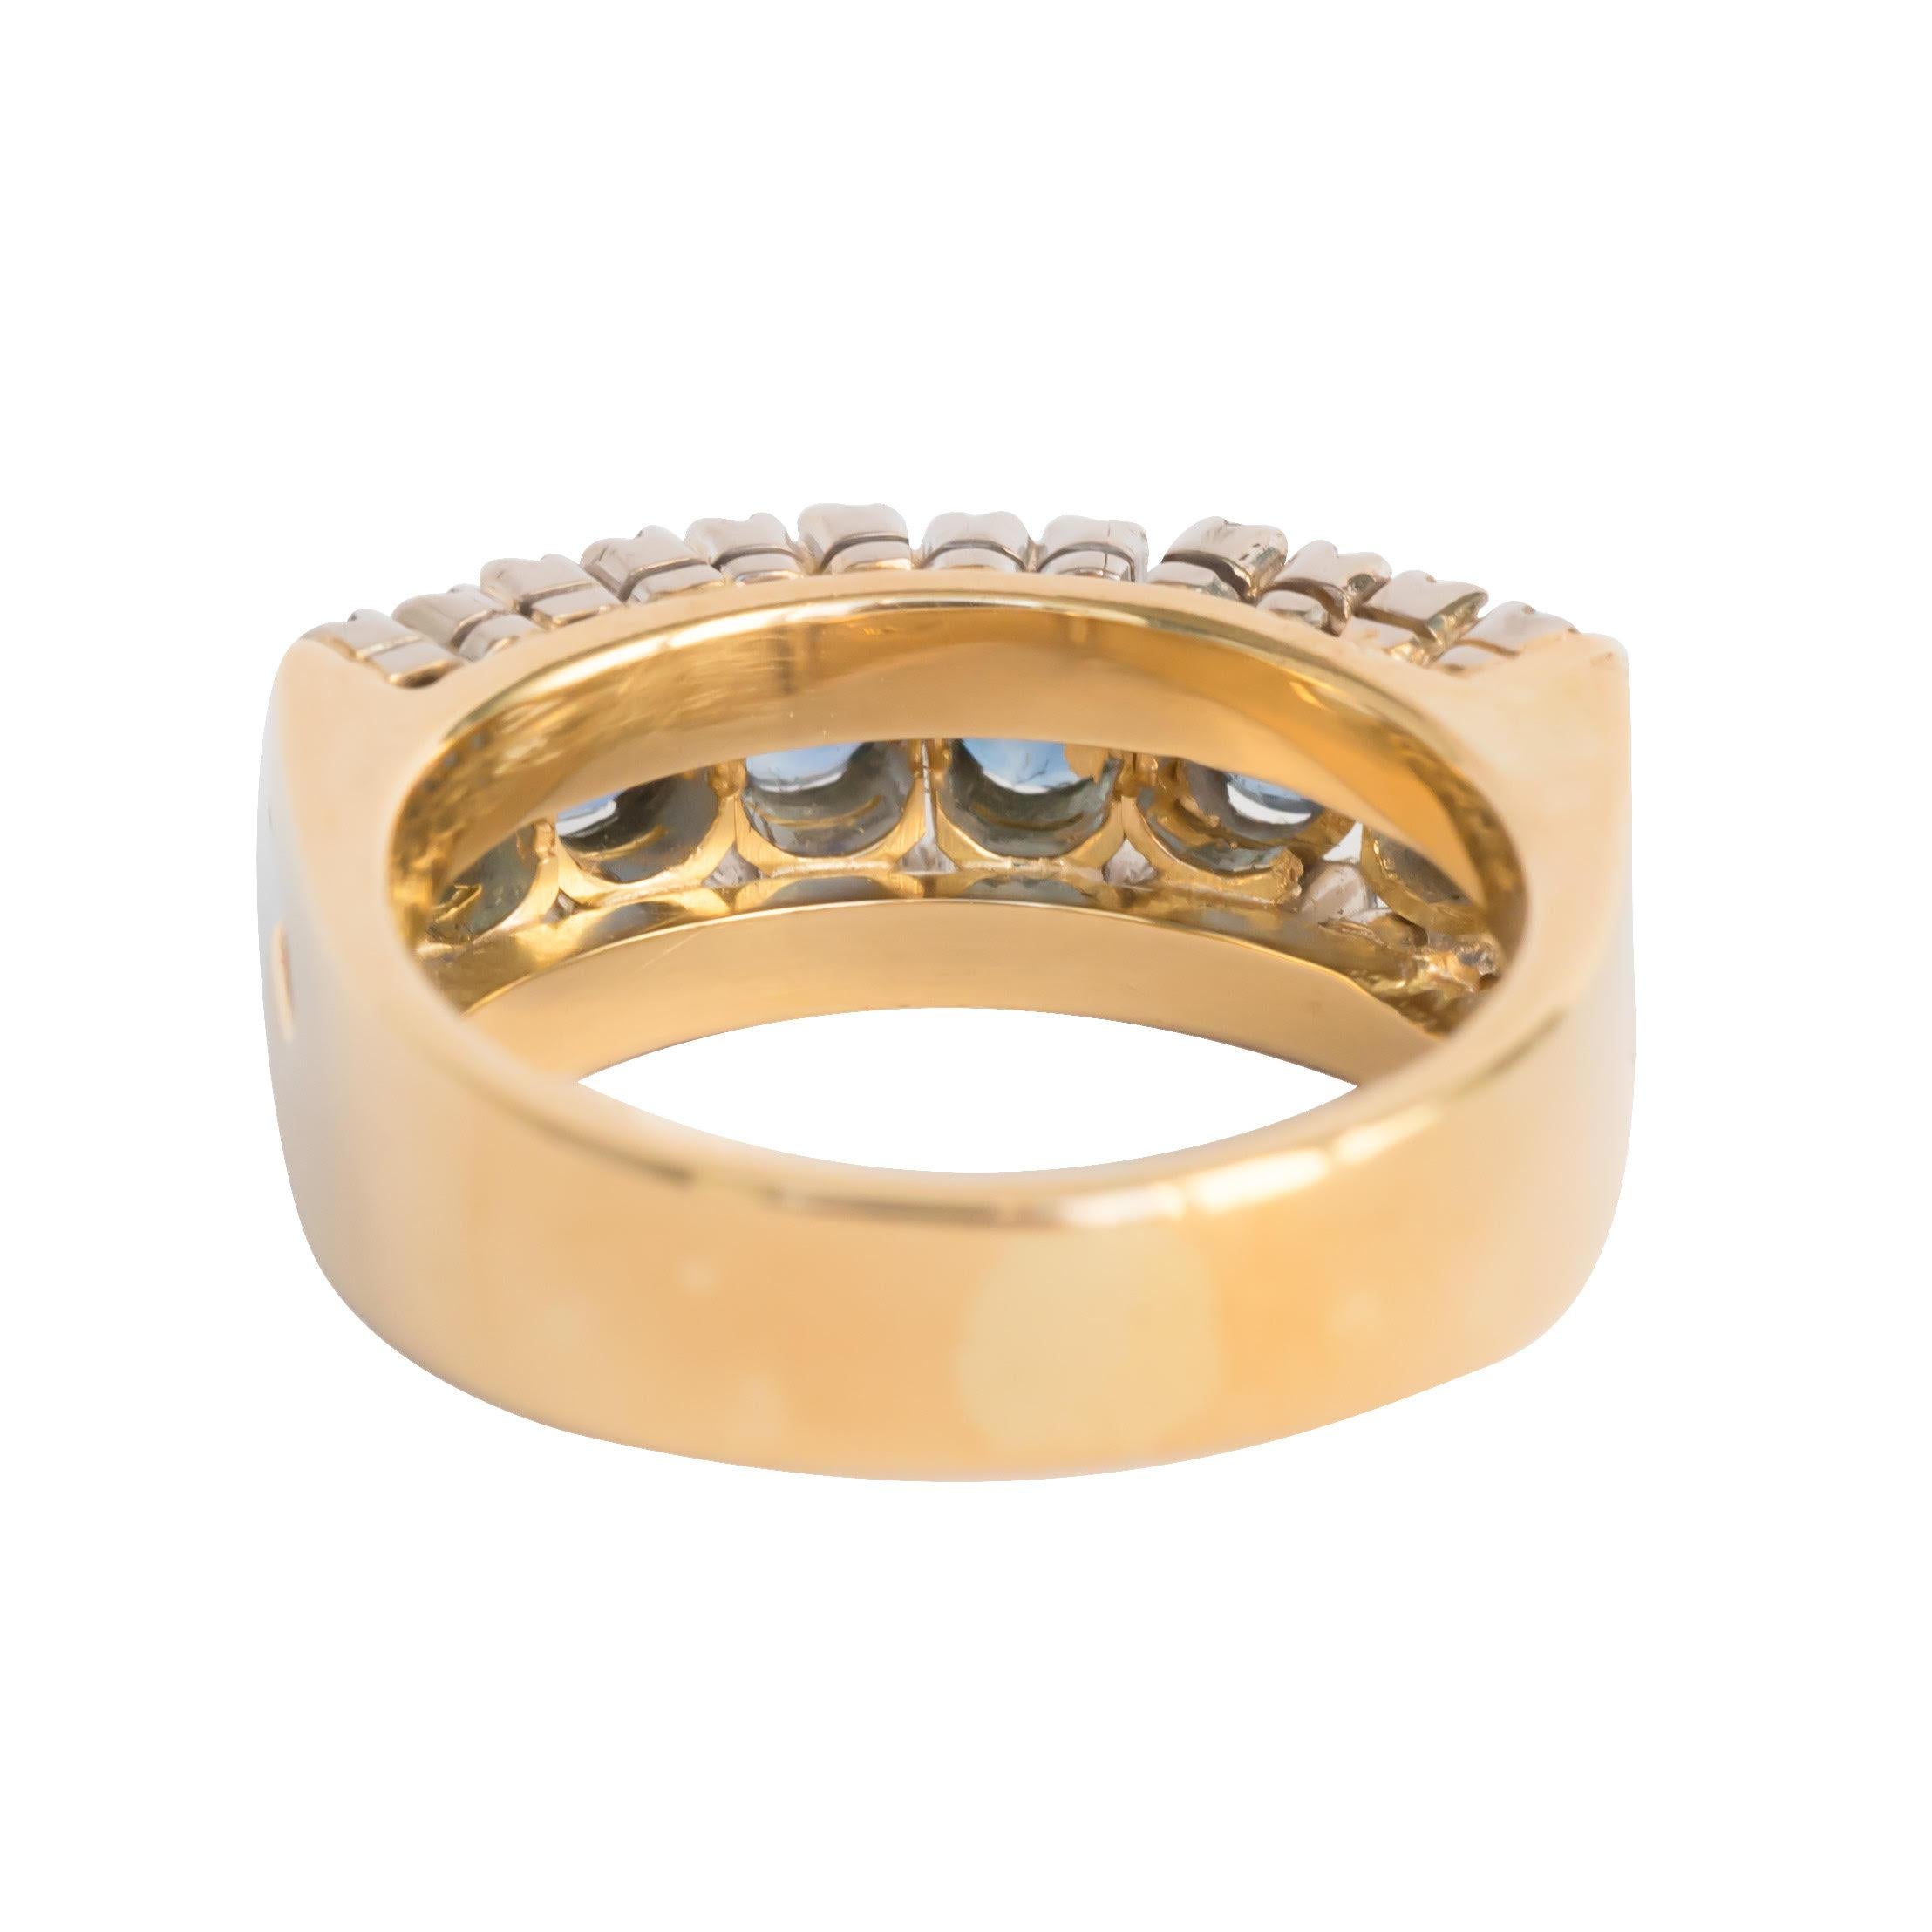 1.00 Carat Total Weight Sapphire Yellow Gold Wedding Band In Good Condition For Sale In Atlanta, GA